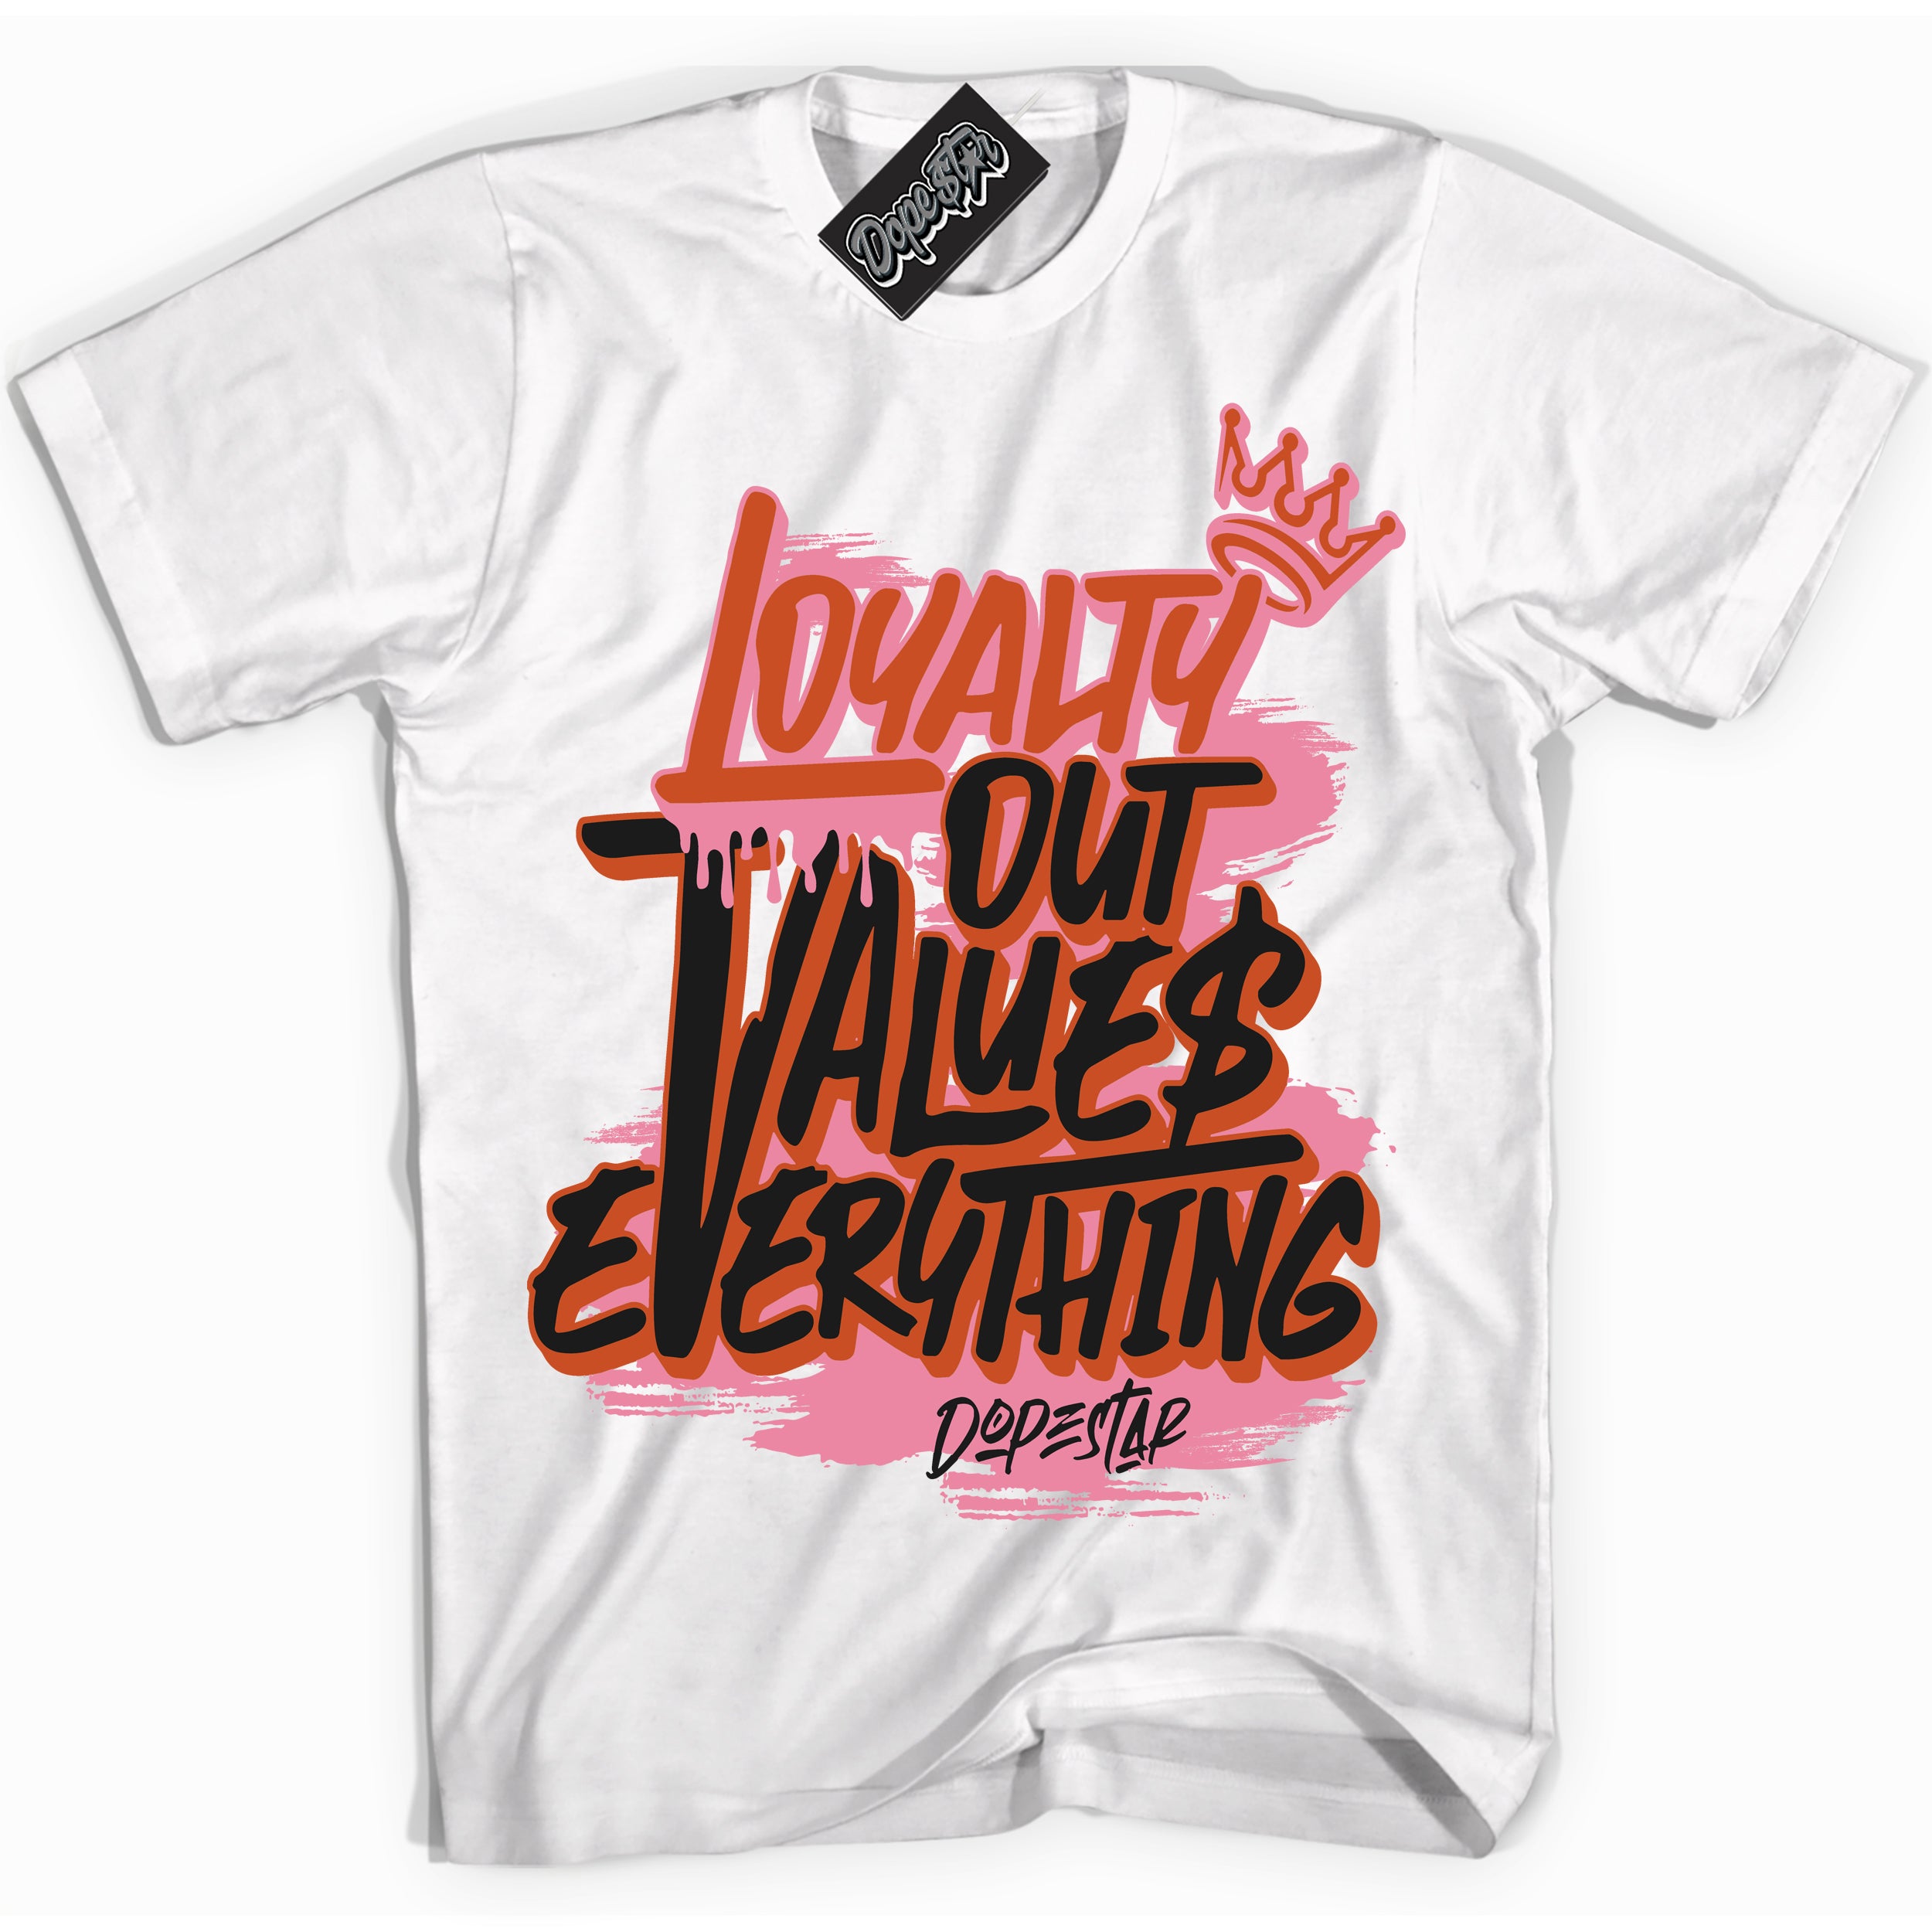 Cool White Shirt with “ Loyalty Out Values Everything” design that perfectly matches Pro x Powerpuff Girls Blossom Sneakers.